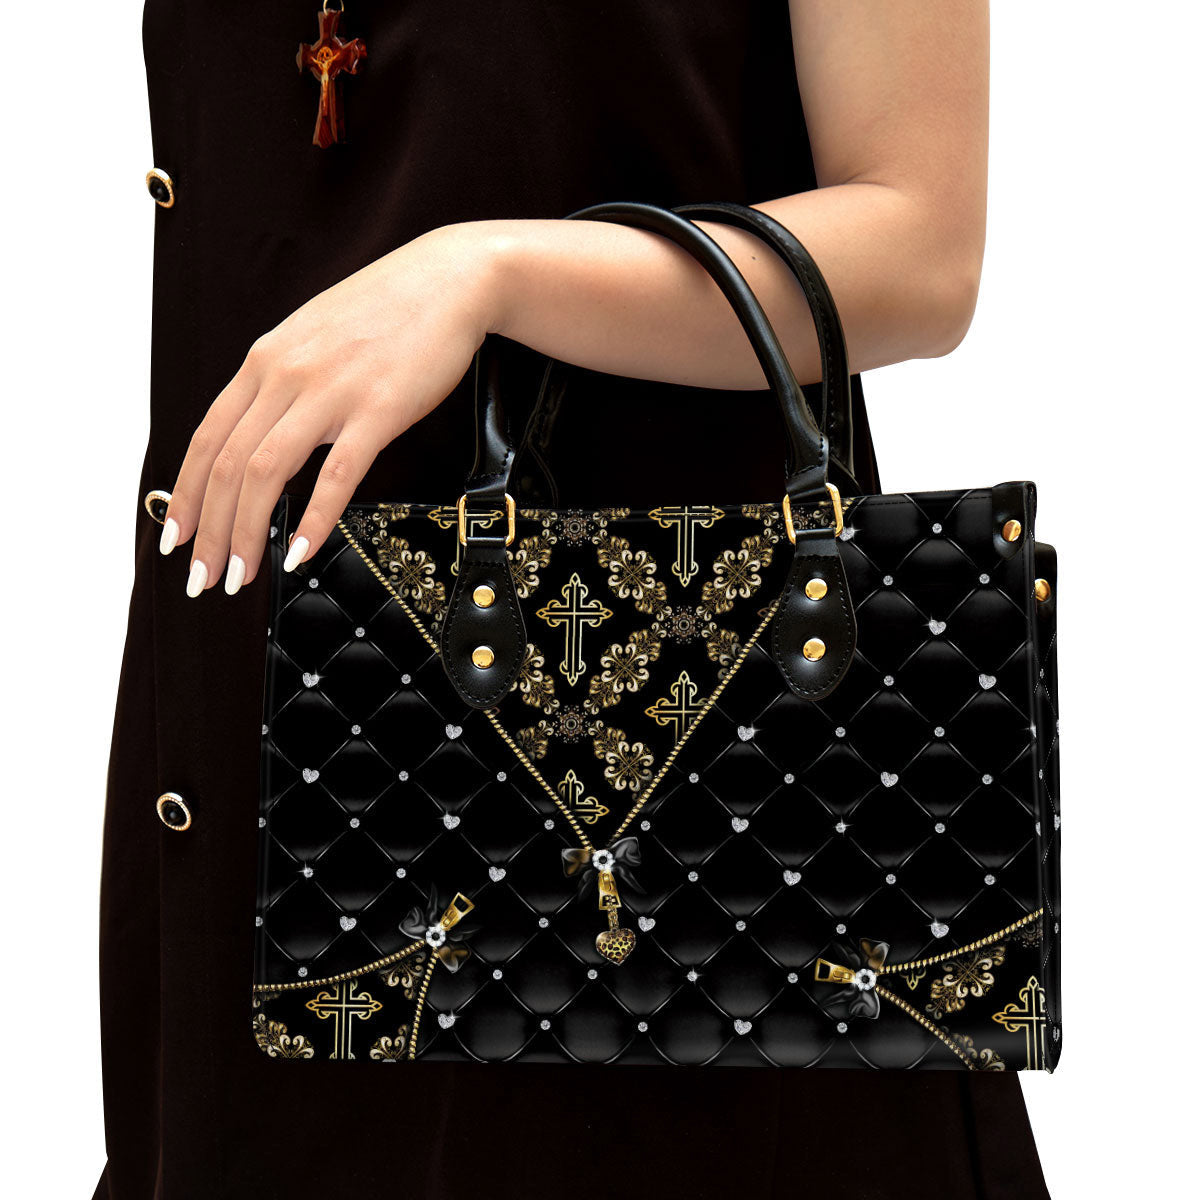 Unique Cross Leather Handbag - Religious Gifts For Women - Women Pu Leather Bag